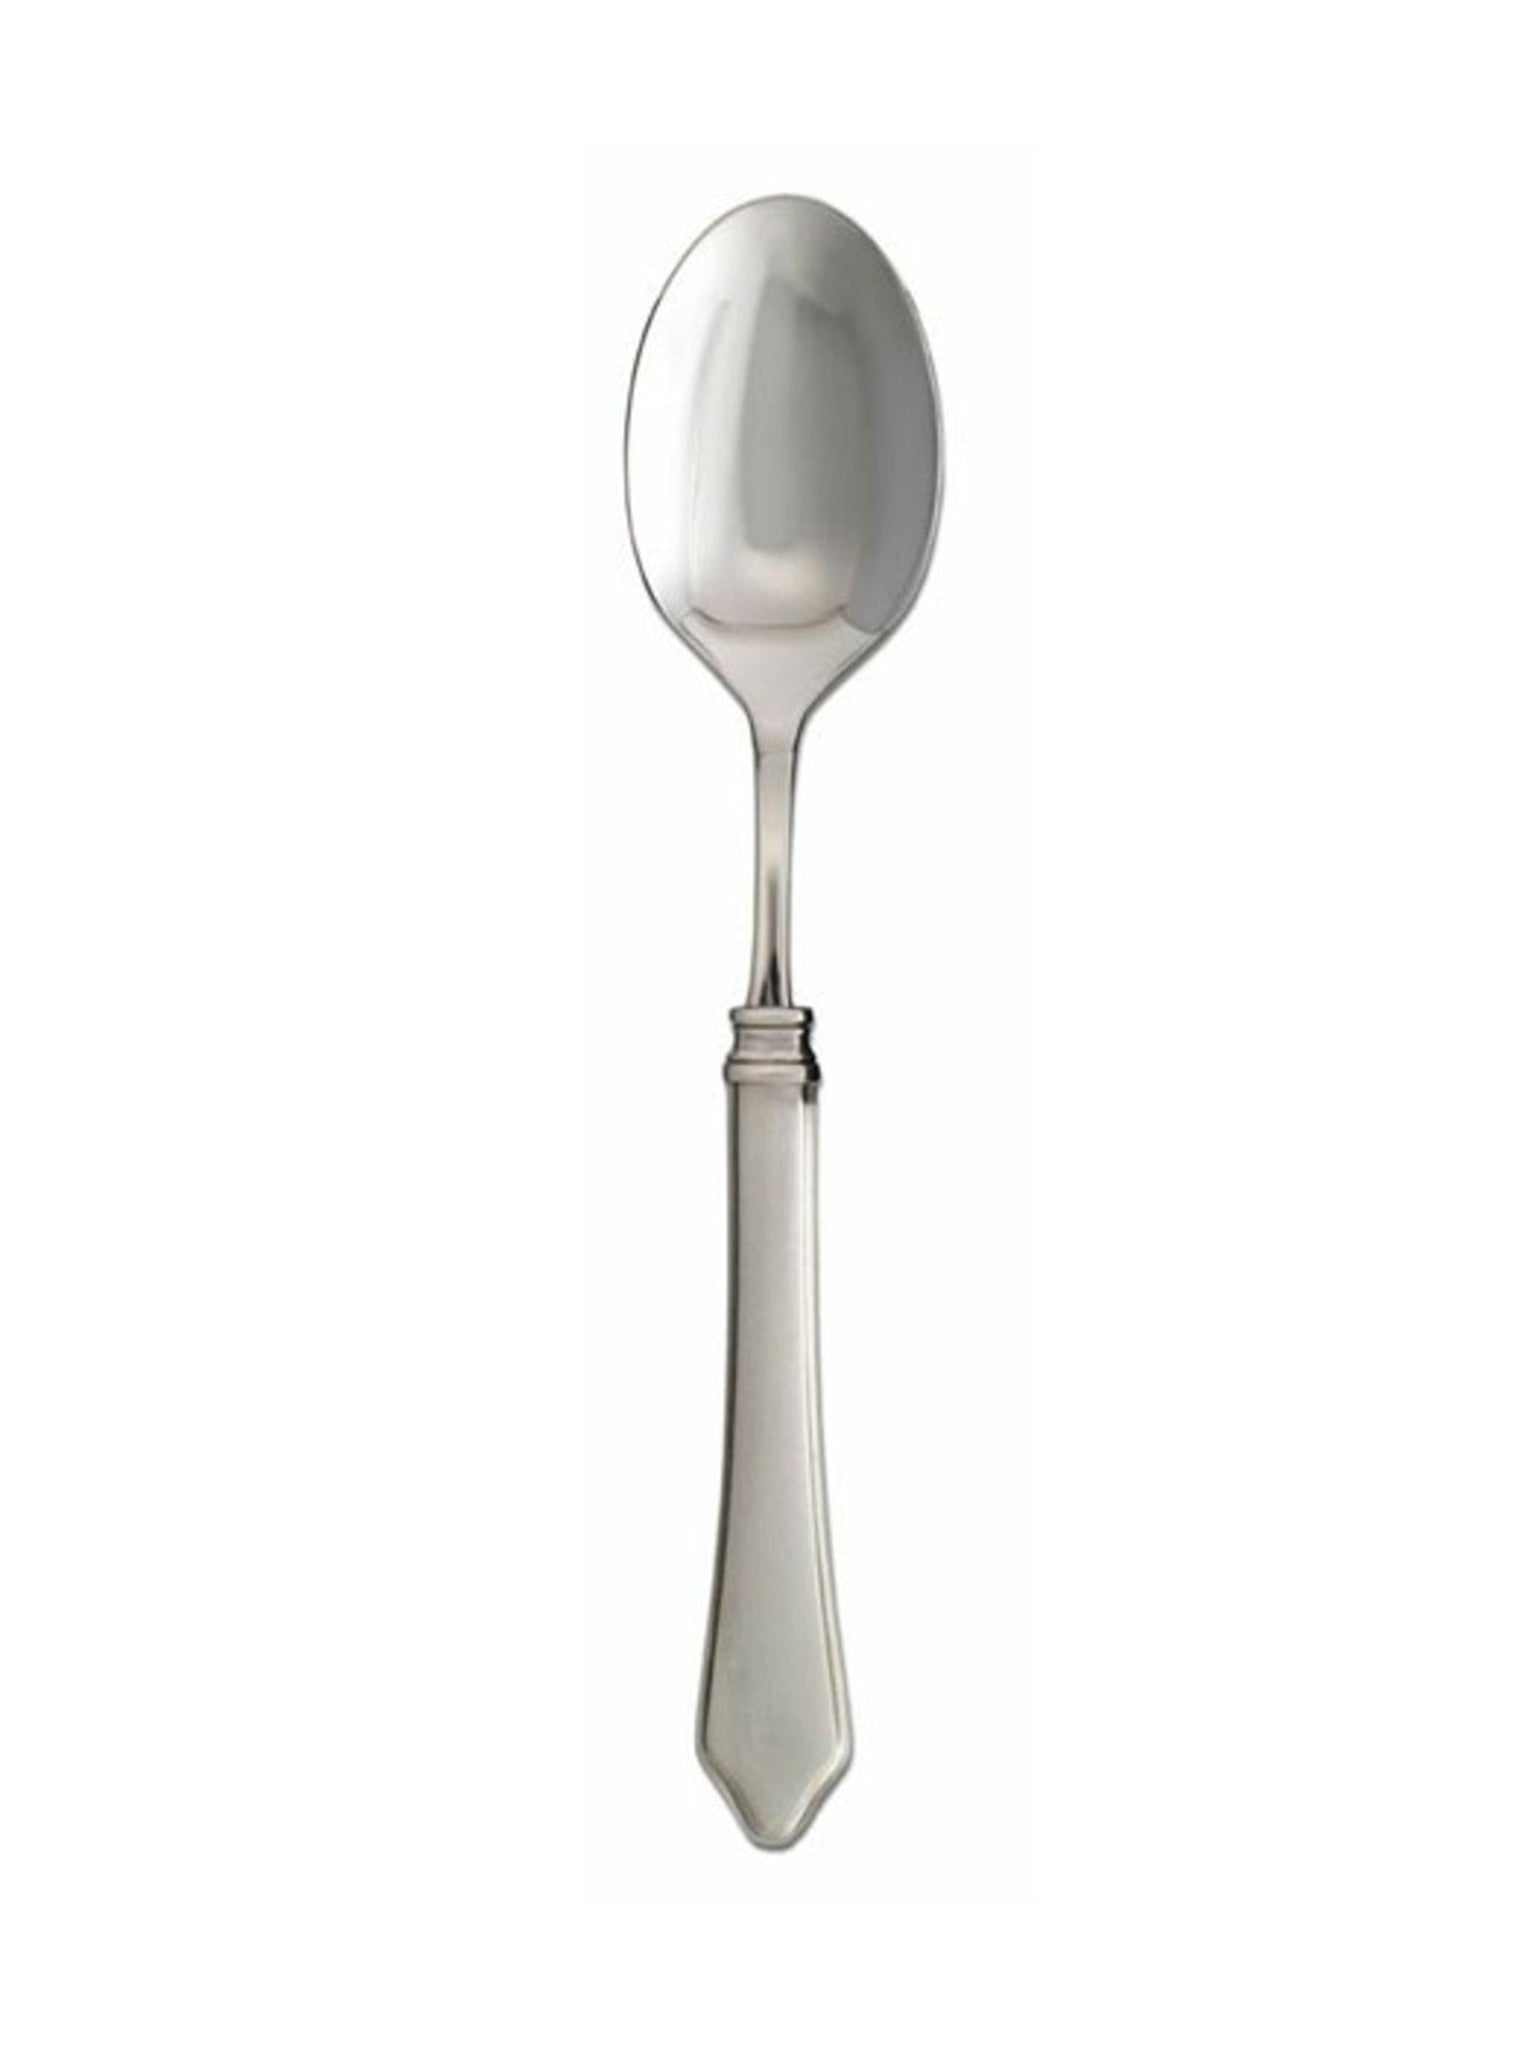 MATCH Pewter Violetta Serving Spoon Weston Table